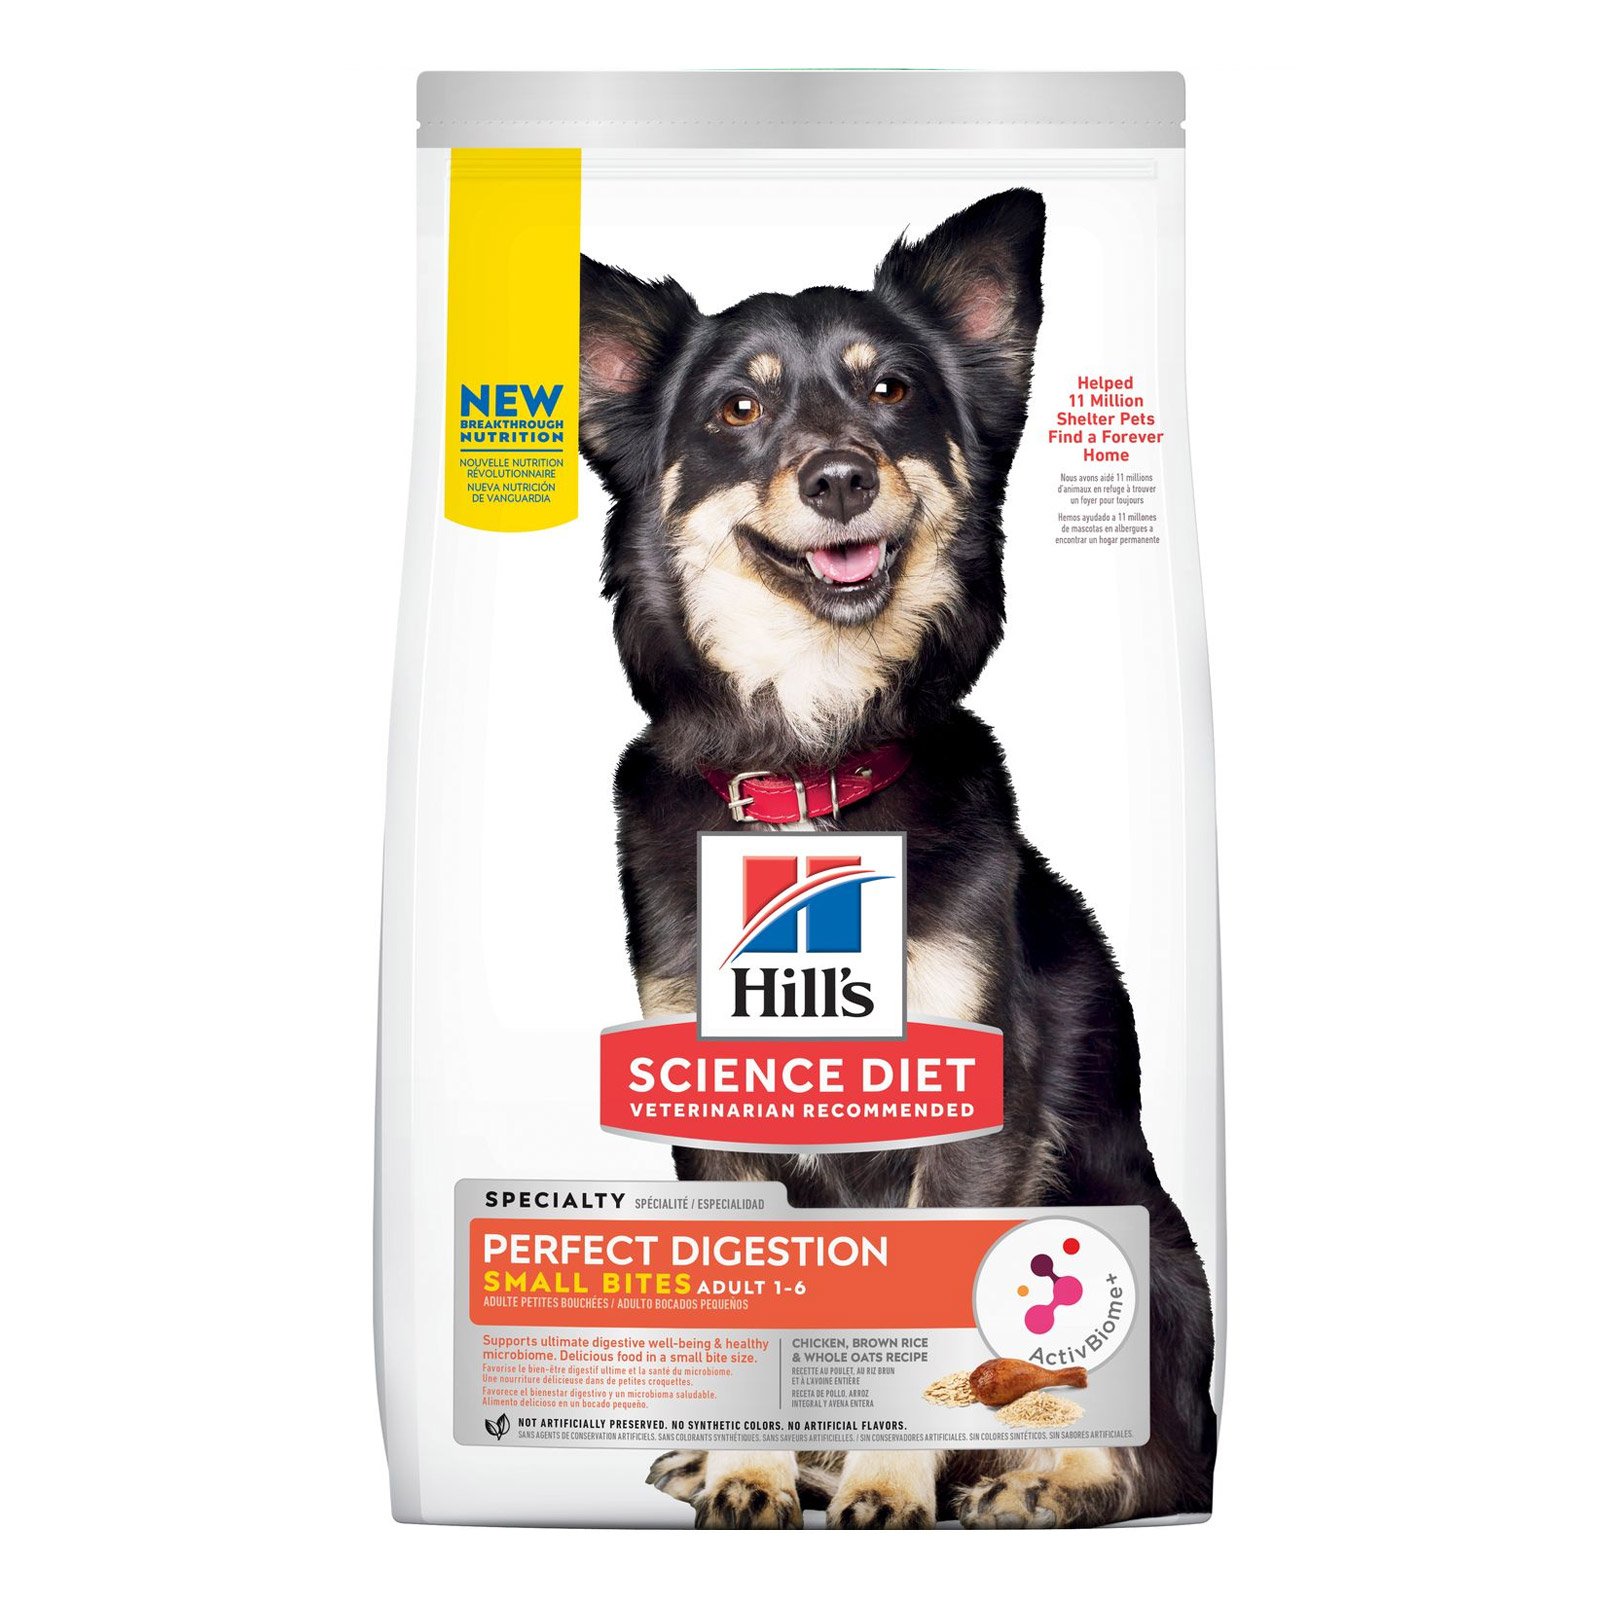 Hill's Science Diet Perfect Digestion Small Bites Dog Food 5.44 Kgs